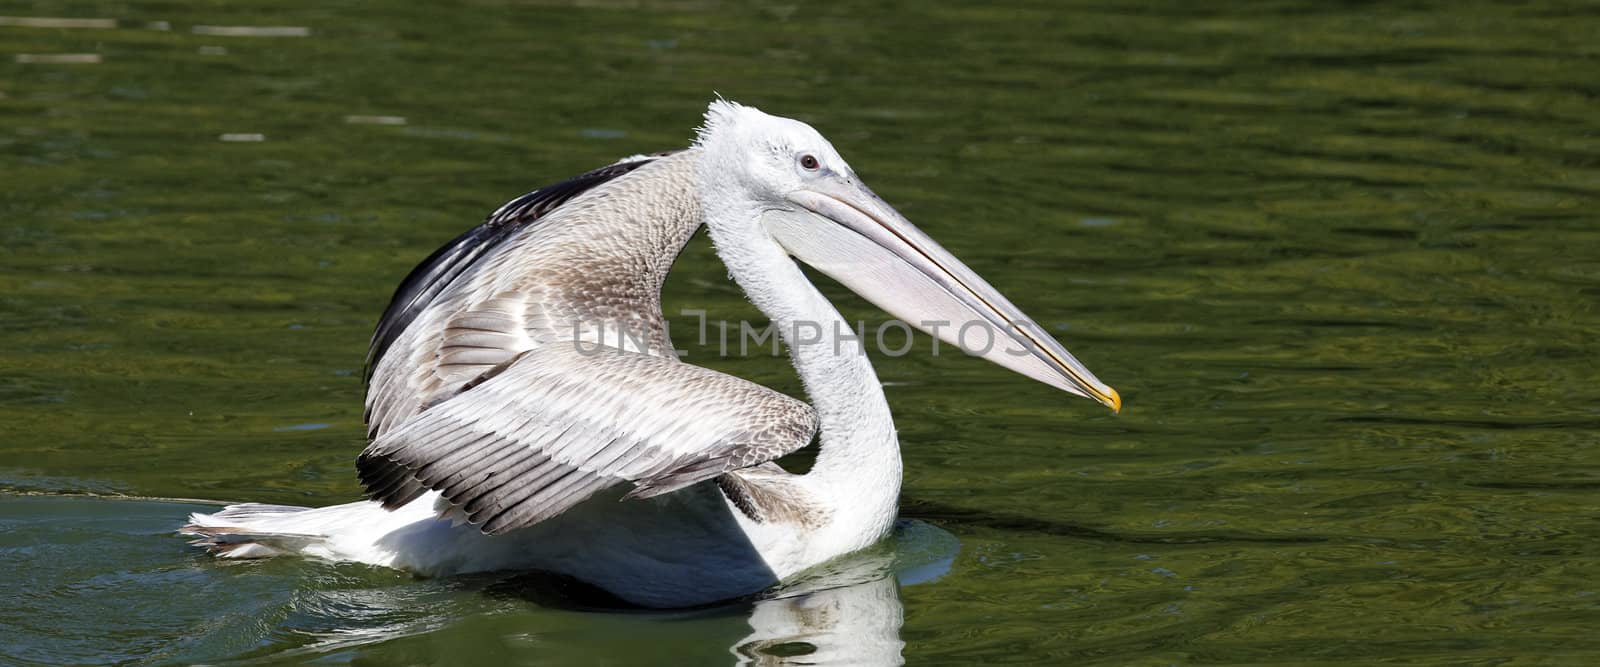 panoramic view of white pelican on water